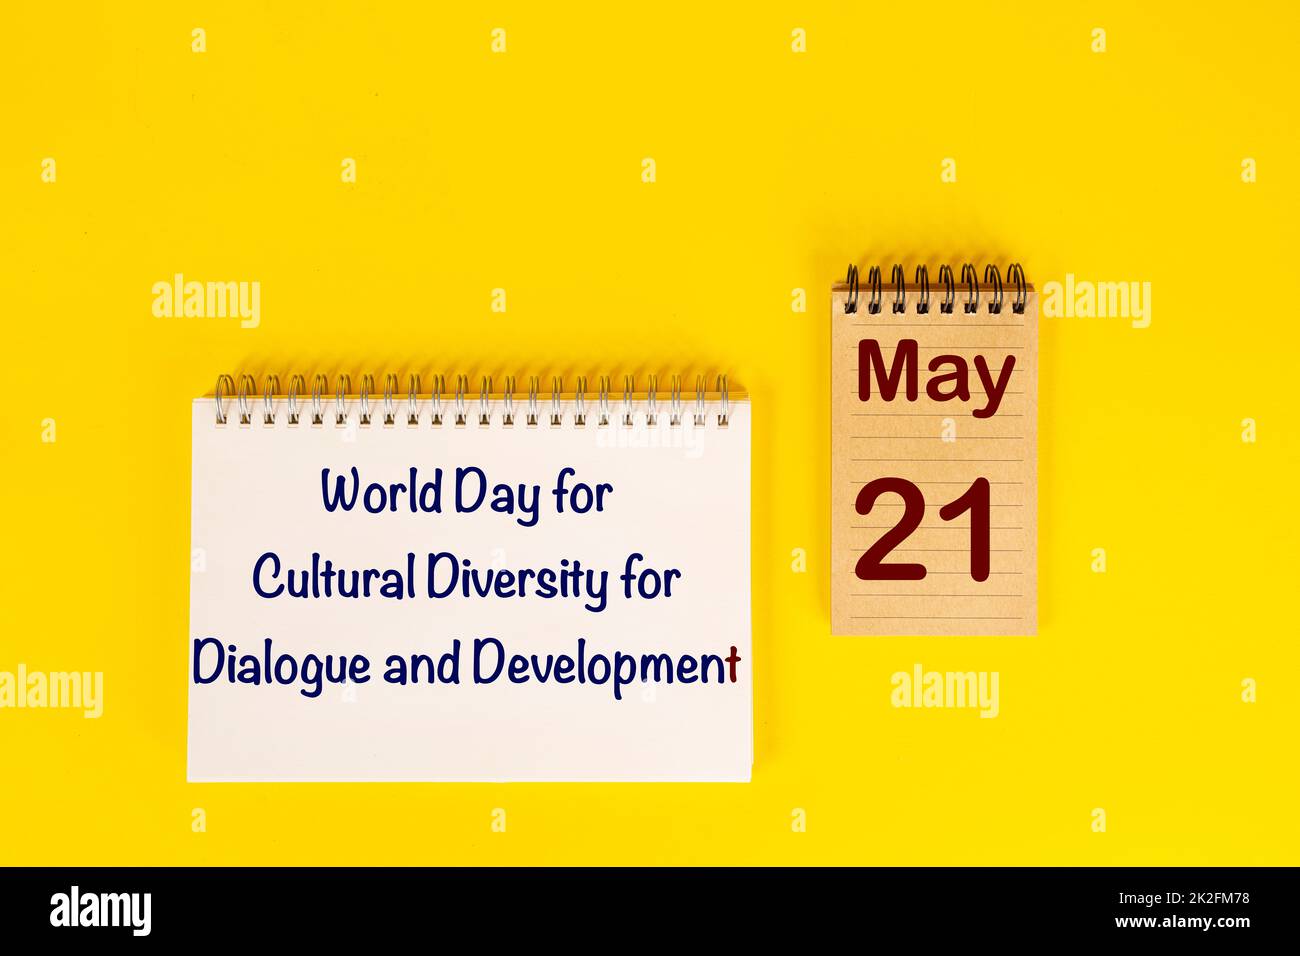 World Day for Cultural Diversity foir Dialogue and Development Stock Photo